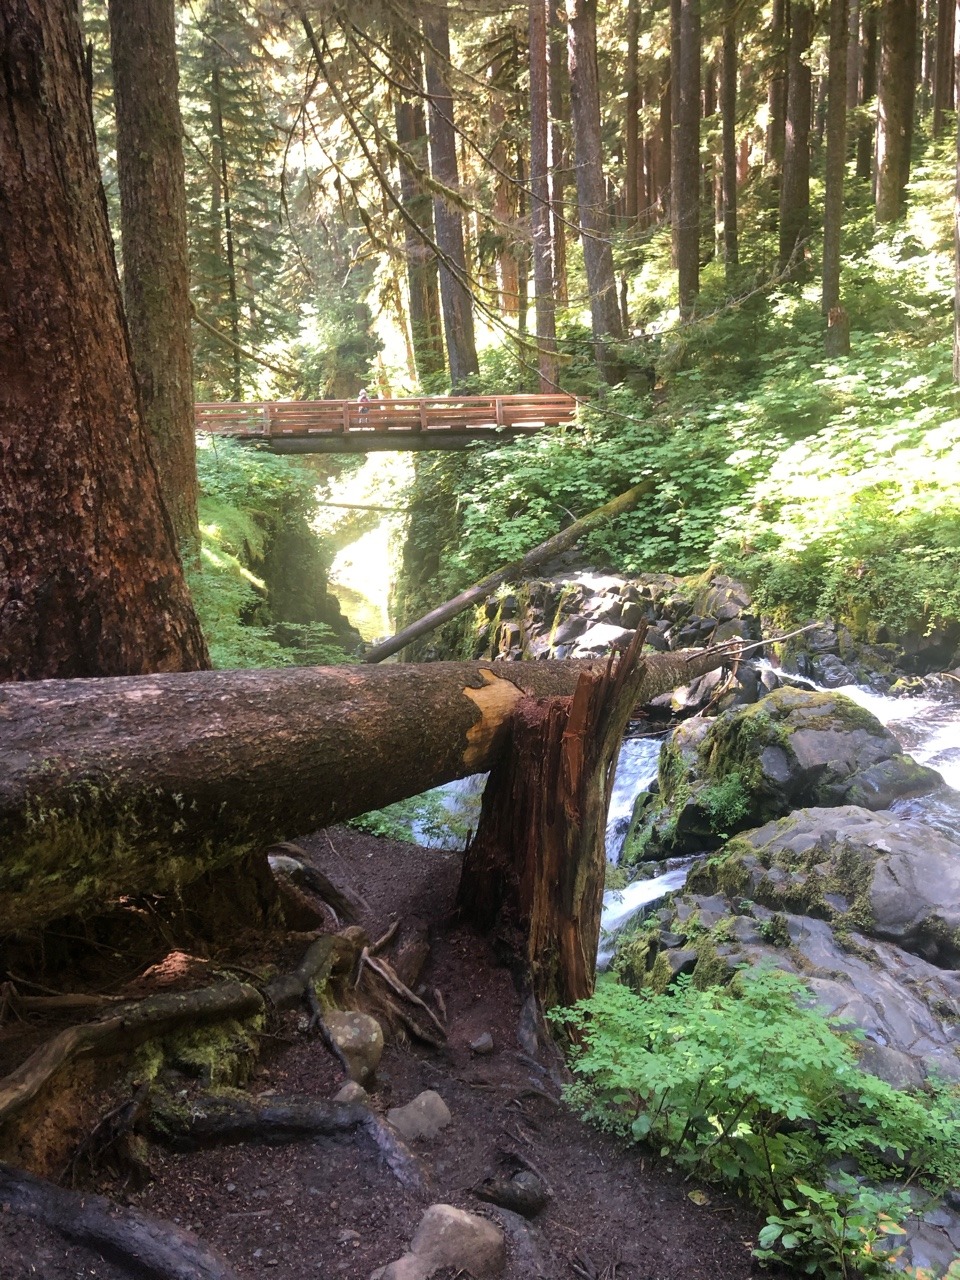 Finally got back out to Sol Duc falls, been talking about it anytime I see it pop